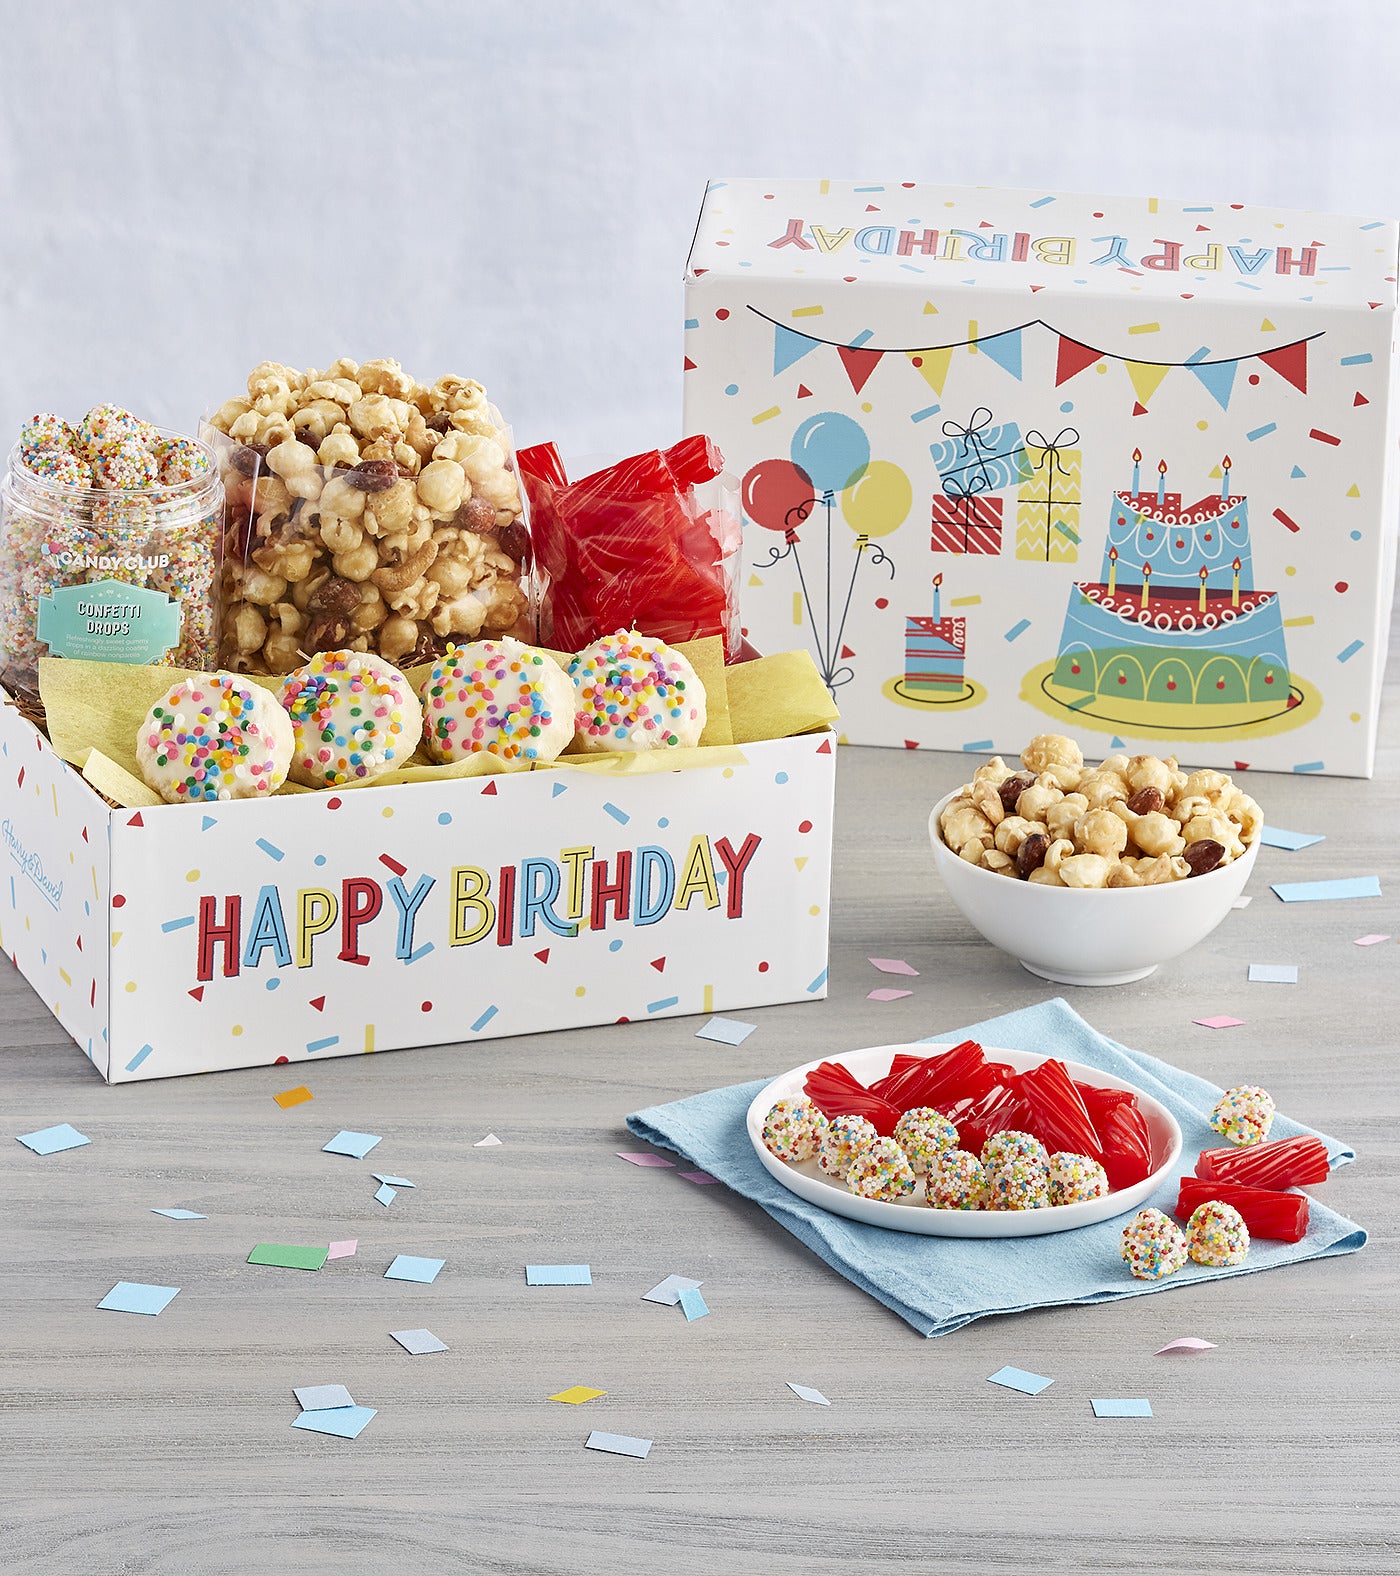 It's Your Birthday, Happy Birthday Wishes To You Gift Box